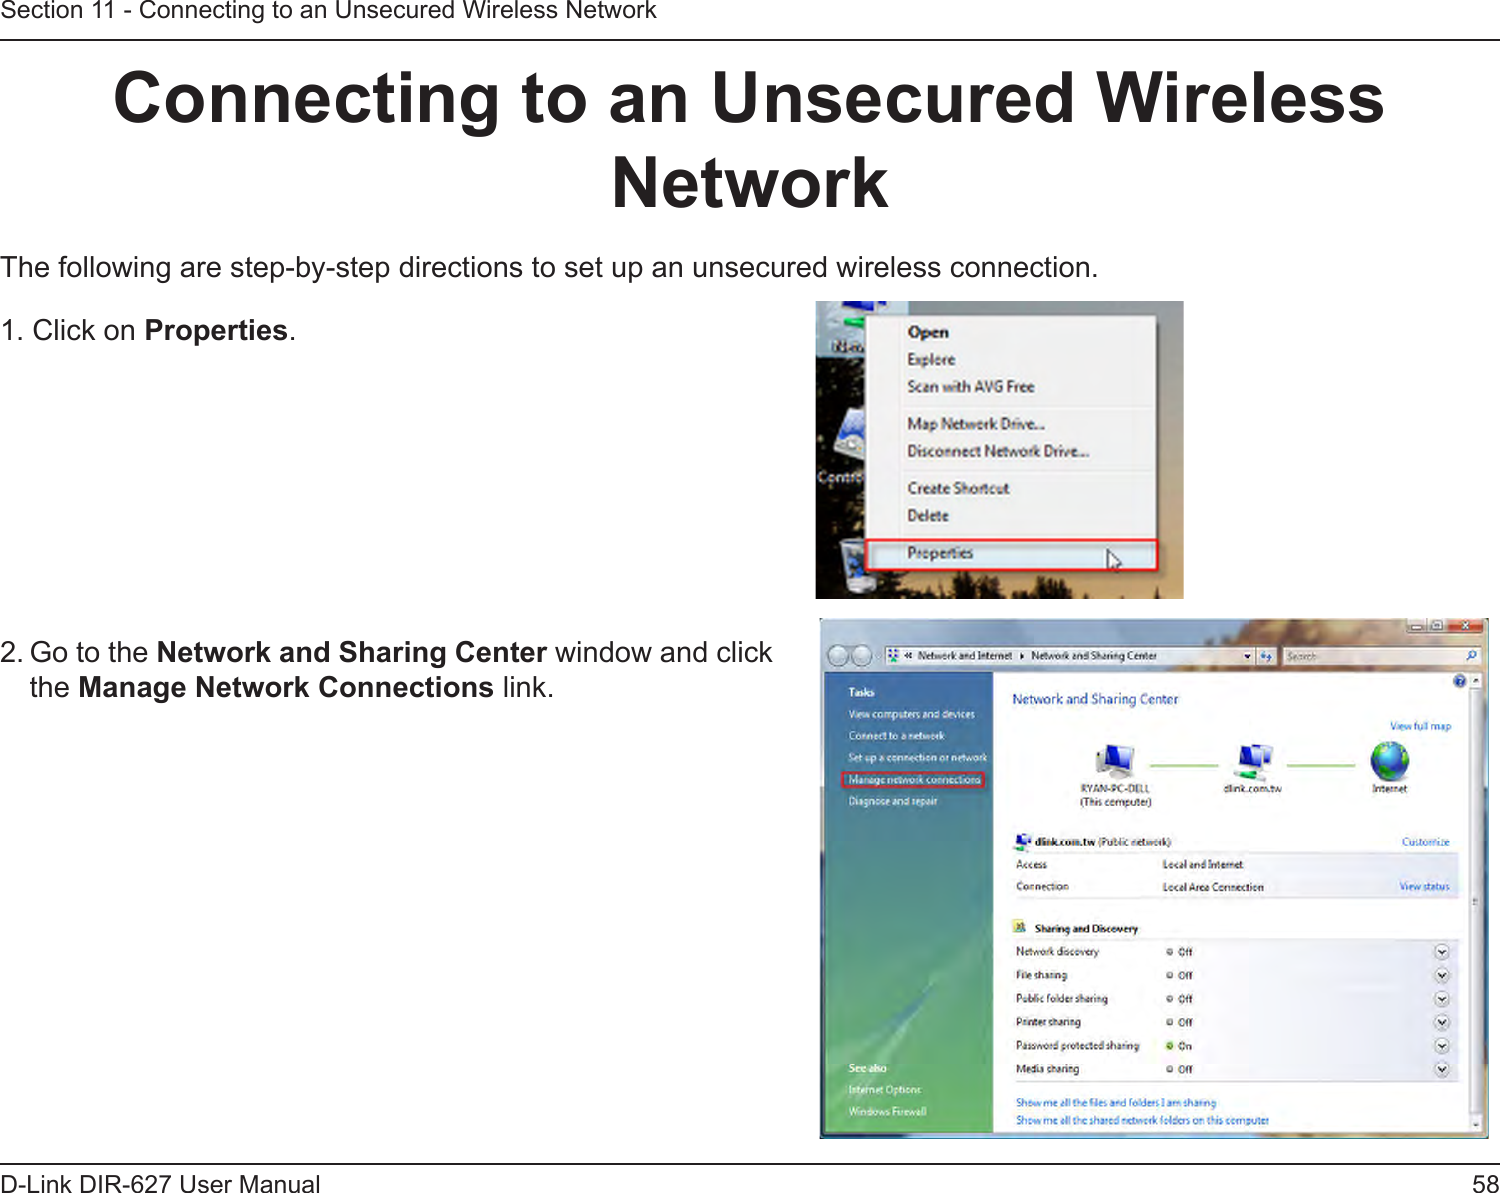 58D-Link DIR-627 User ManualSection 11 - Connecting to an Unsecured Wireless NetworkConnectingtoanUnsecuredWirelessNetworkThe following are step-by-step directions to set up an unsecured wireless connection.2. Go to the NetworkandSharingCenter window and click the ManageNetworkConnections link. 1. Click on Properties.     